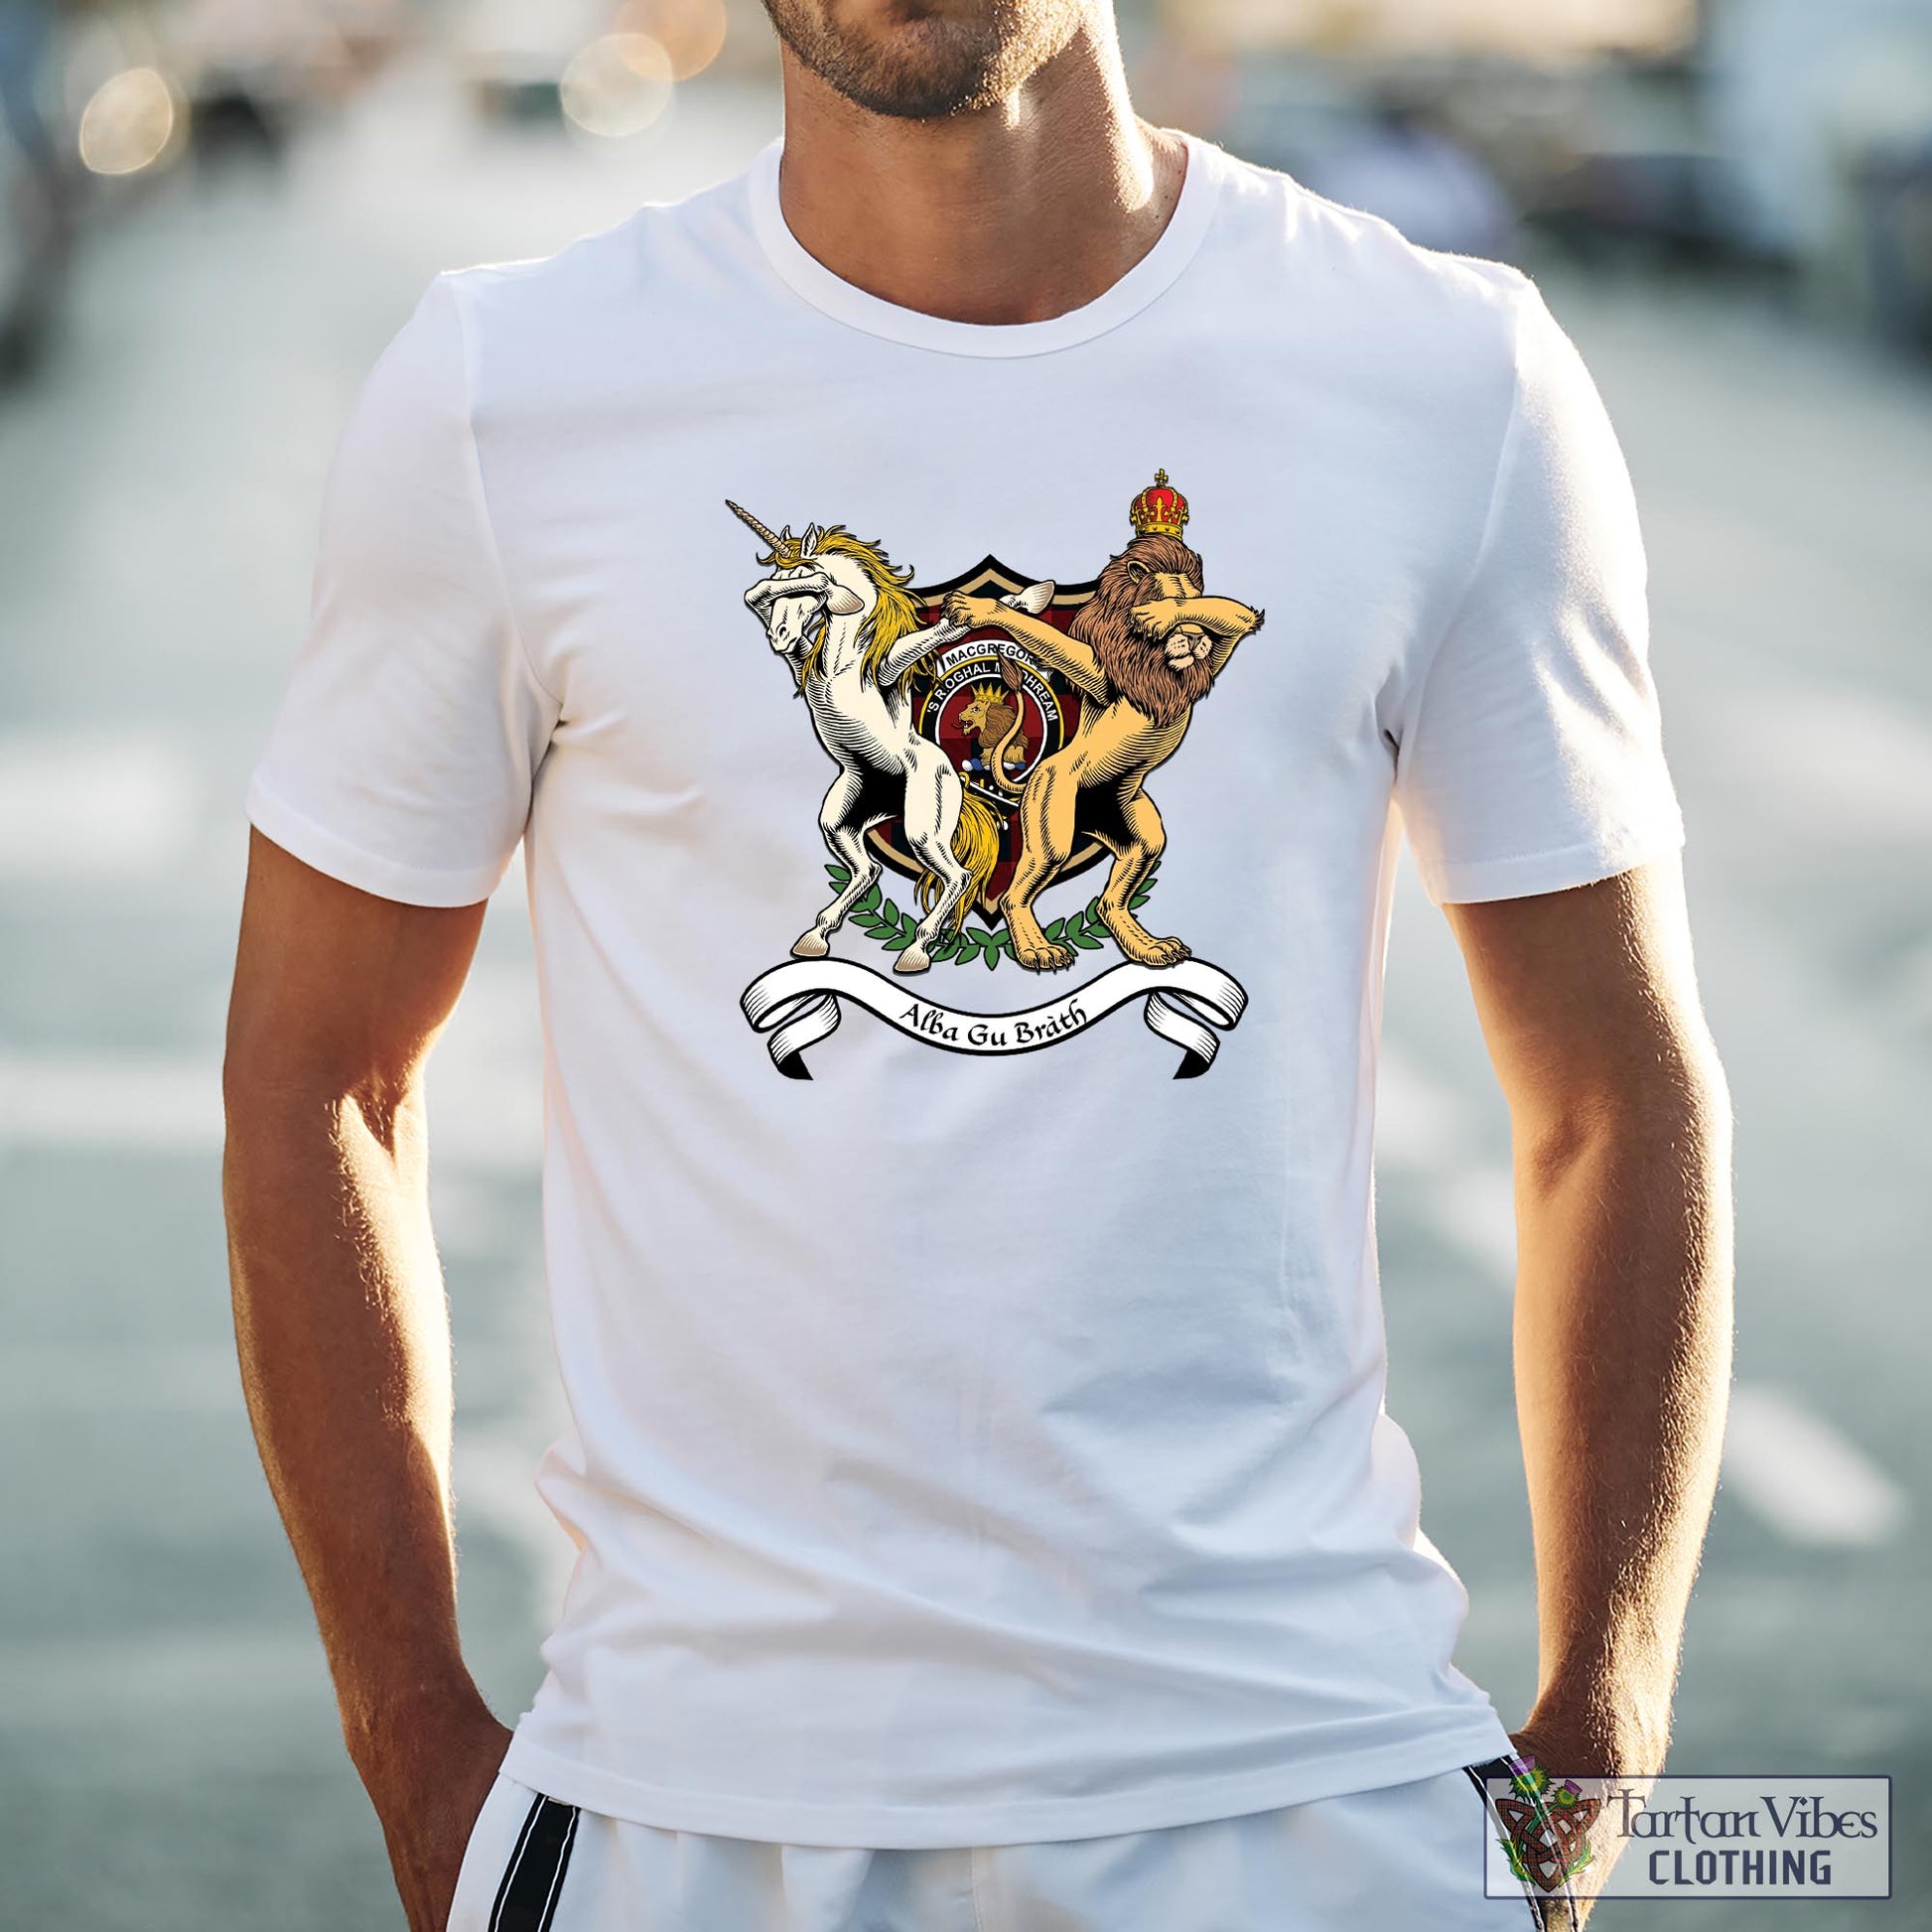 Tartan Vibes Clothing Rob Roy Macgregor Family Crest Cotton Men's T-Shirt with Scotland Royal Coat Of Arm Funny Style